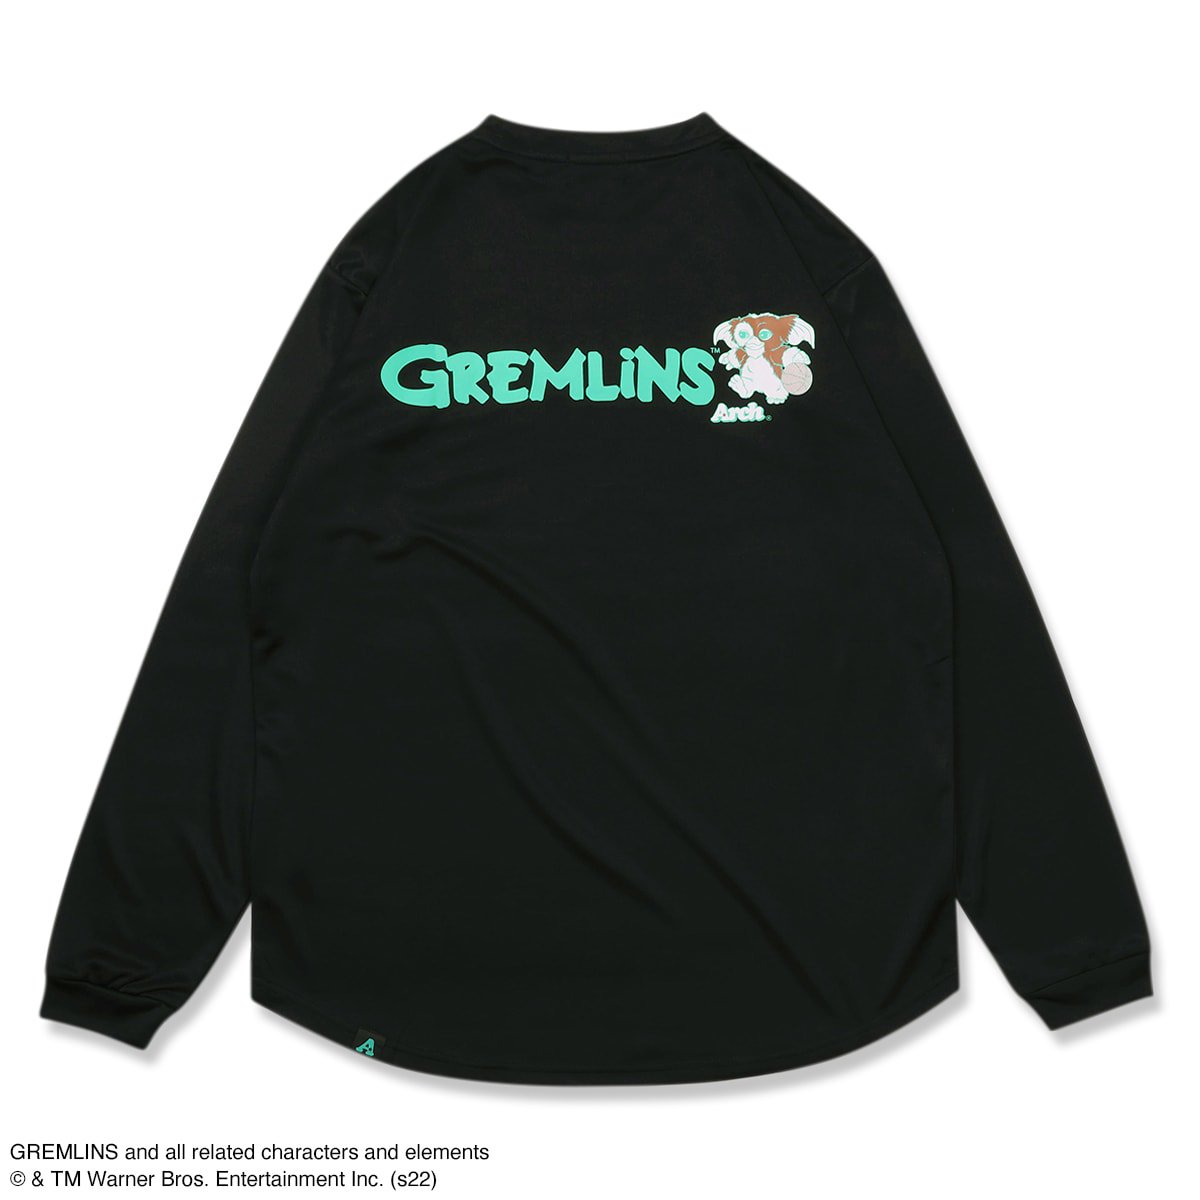 GREMLINS | Arch naughty L/S tee [DRY]【black】 - Arch ☆ アーチ  [バスケットボール＆ライフスタイルウェア Basketball&Lifestyle wear]